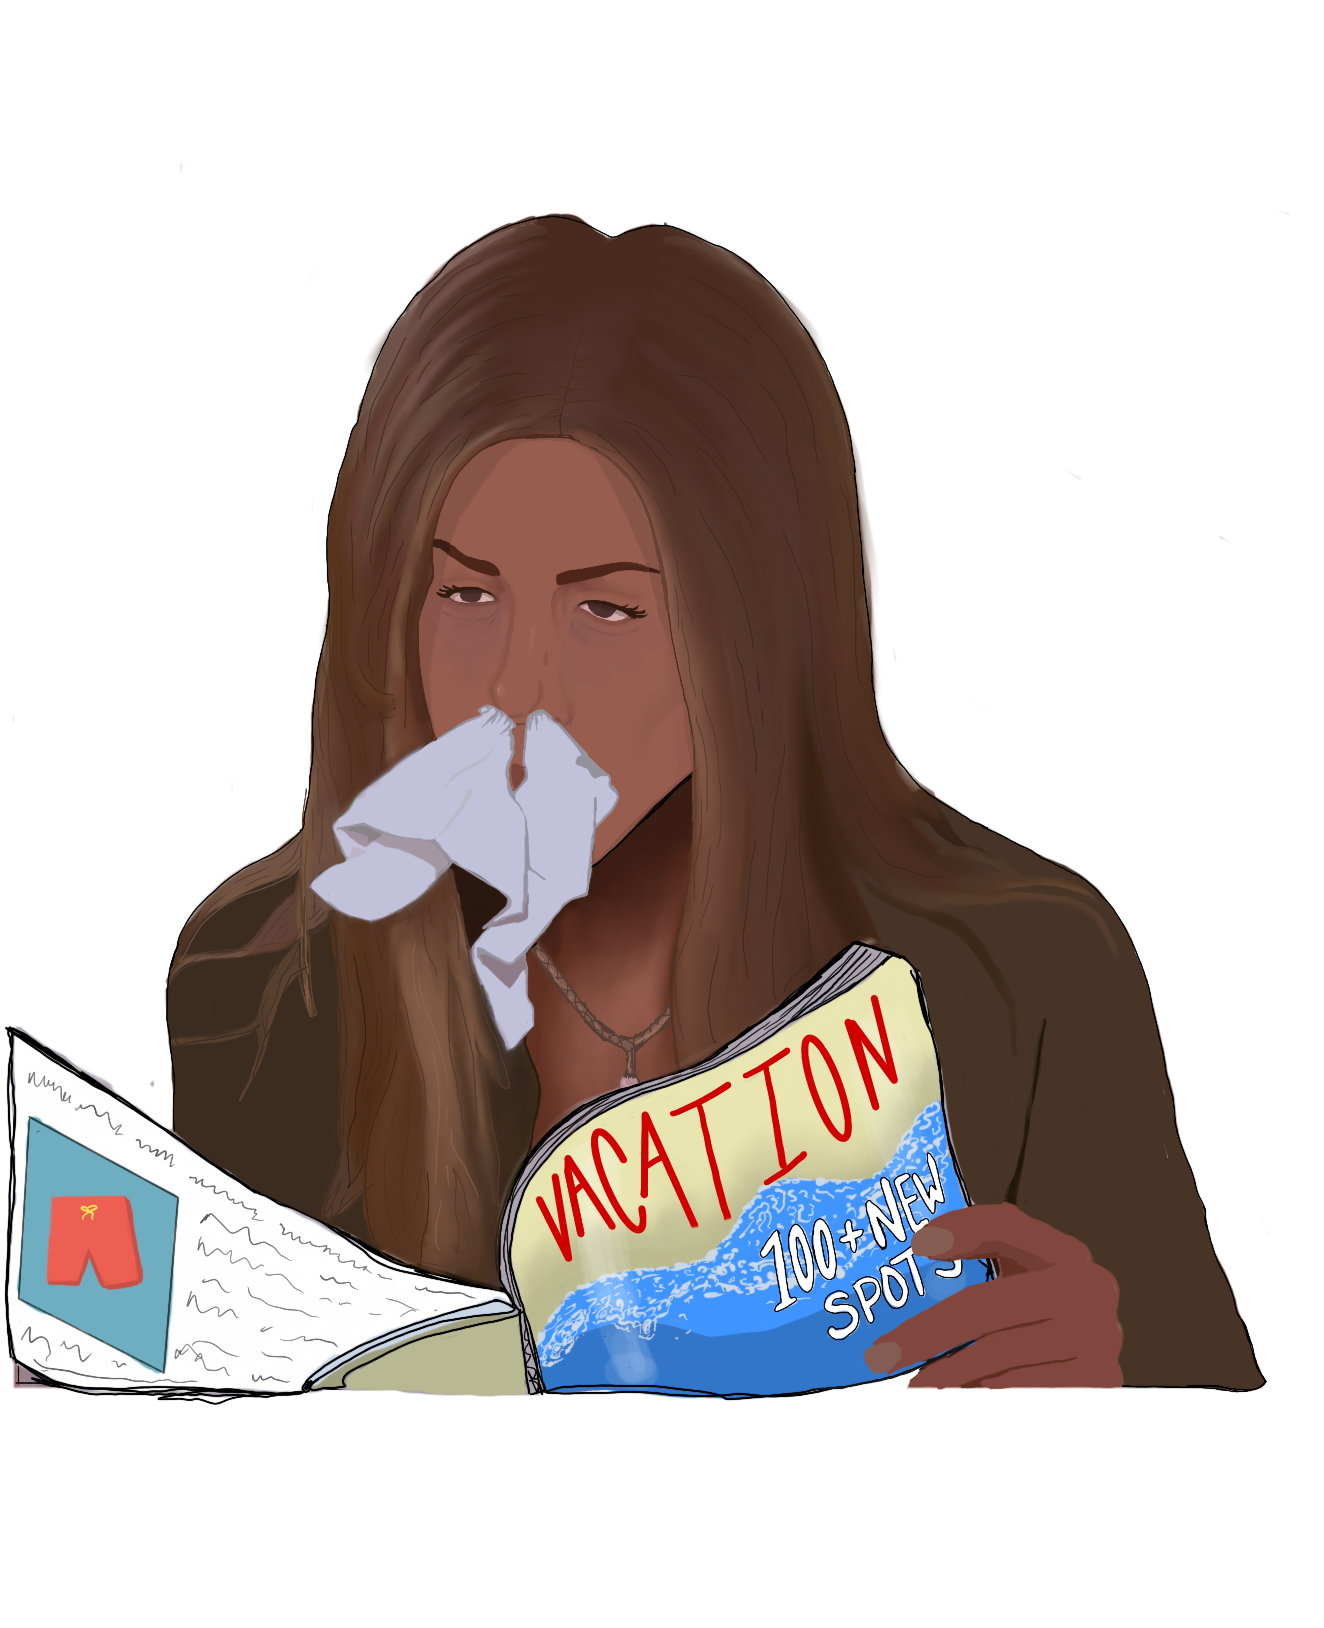 Girl with tissue in her nose reads magazine titled: Vacation, 100+ new spots